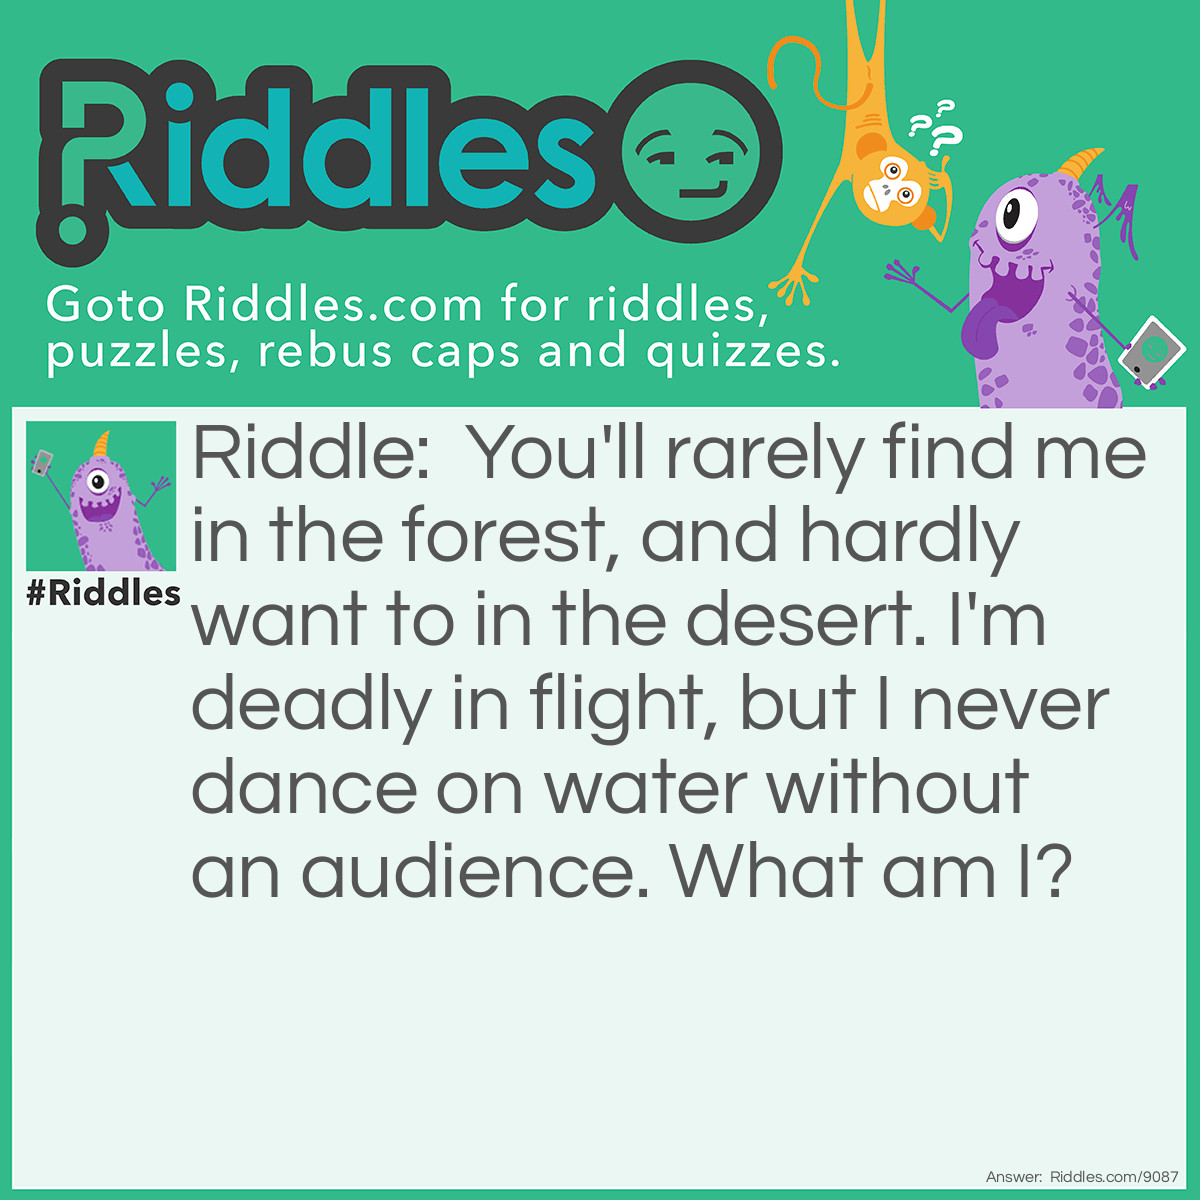 Riddle: You'll rarely find me in the forest, and hardly want to in the desert. I'm deadly in flight, but I never dance on water without an audience. What am I? Answer: Skipping Stone.